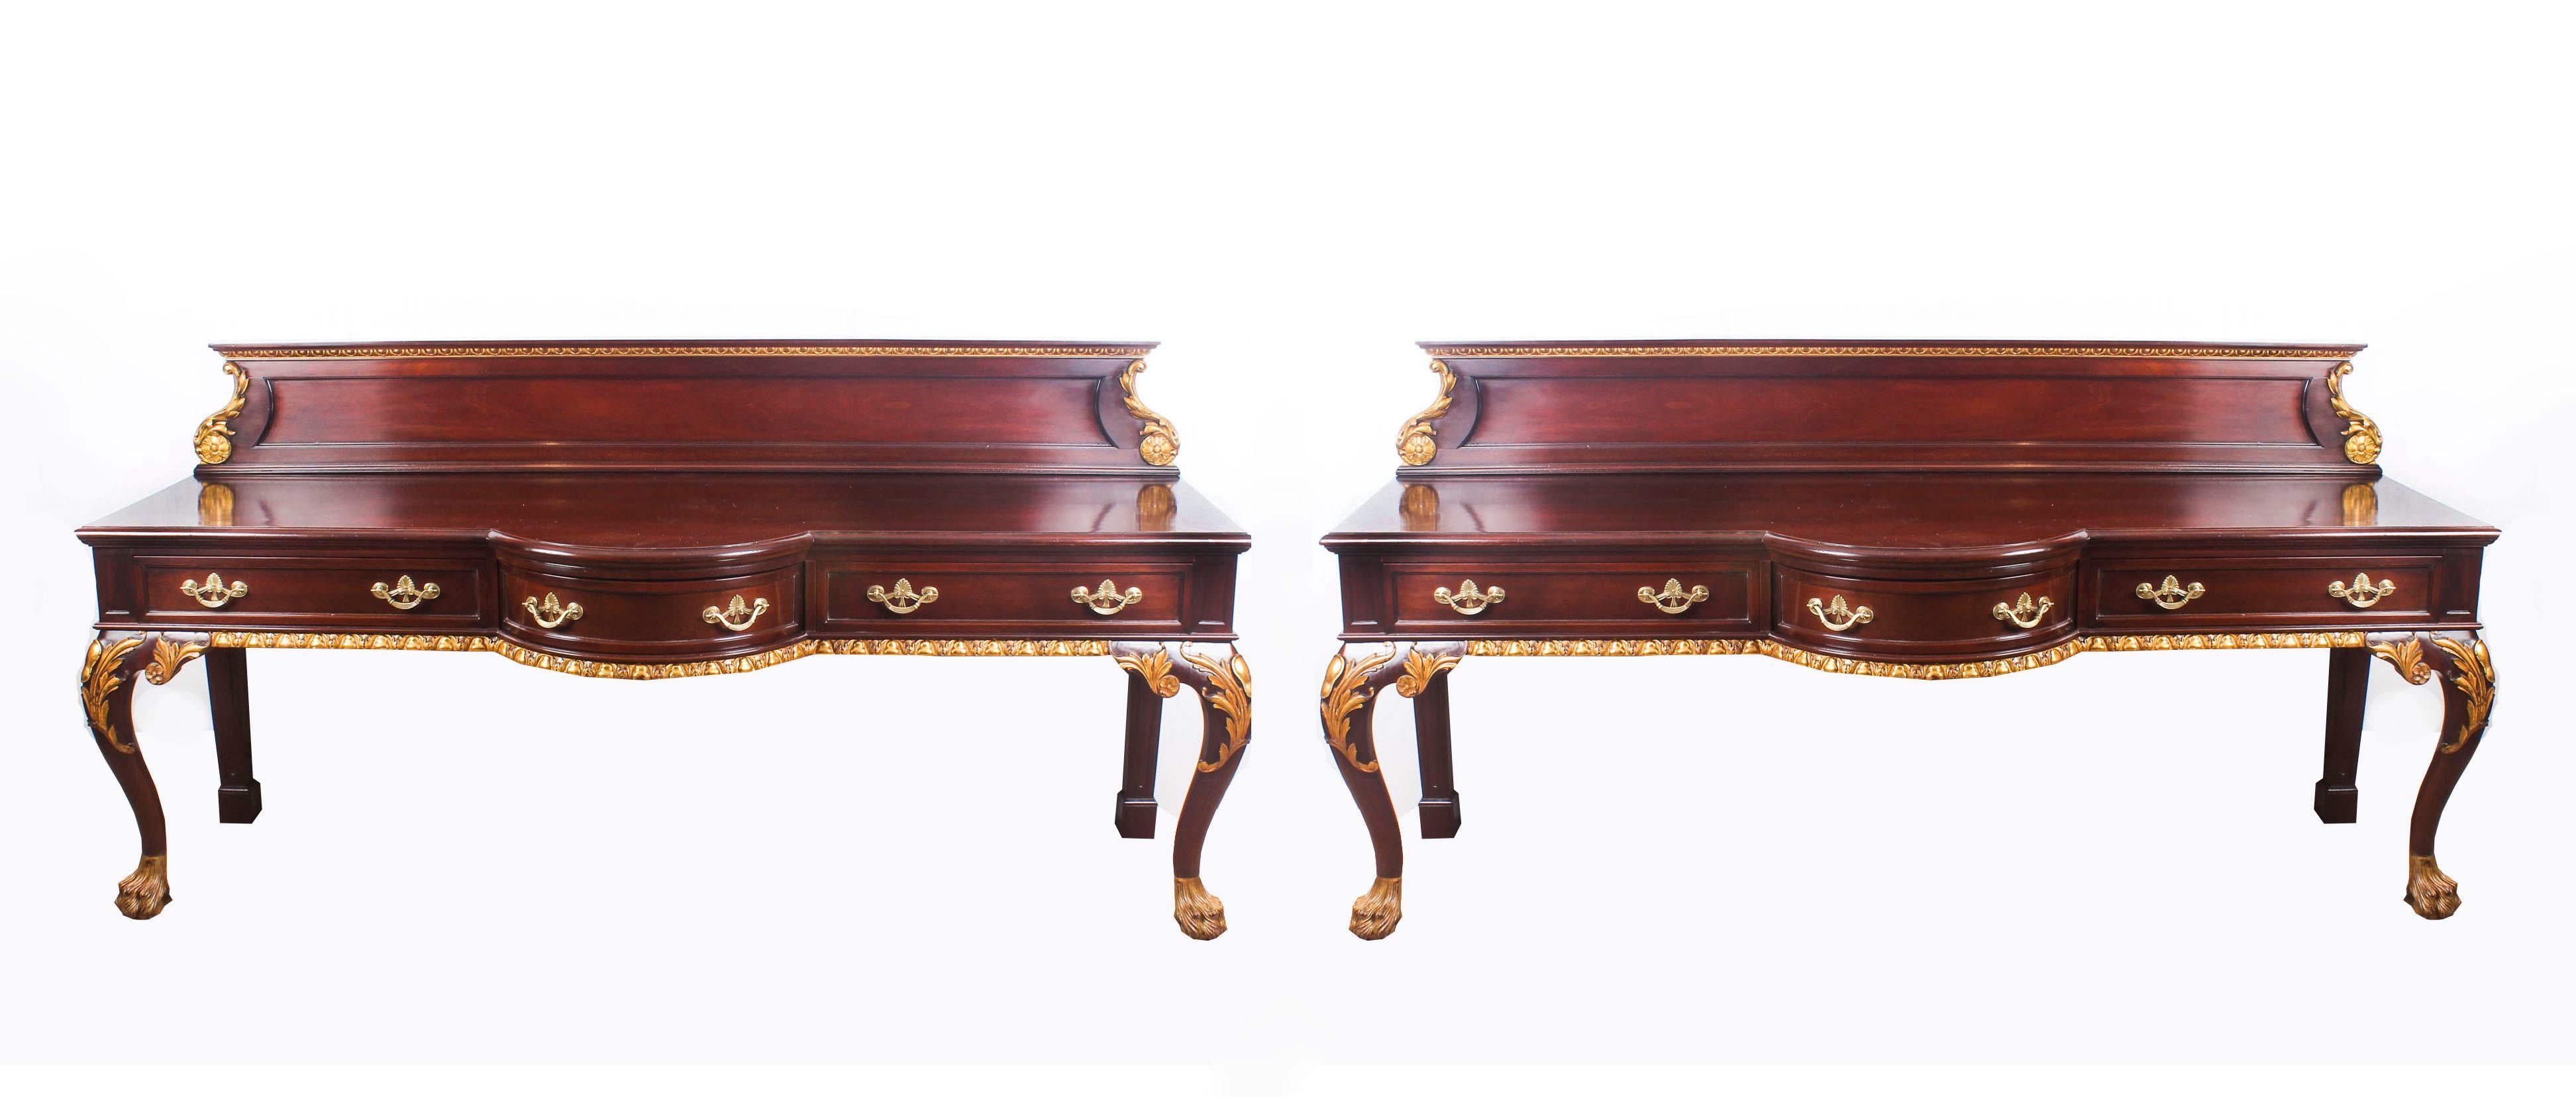 This is a fine monumental pair of antique mahogany and parcel gilt serving tables in the George II style, dating from the 19th century.

The backs are decorated with egg and dart moulding and acanthus scrolls. Each central bowfront drawer is flanked